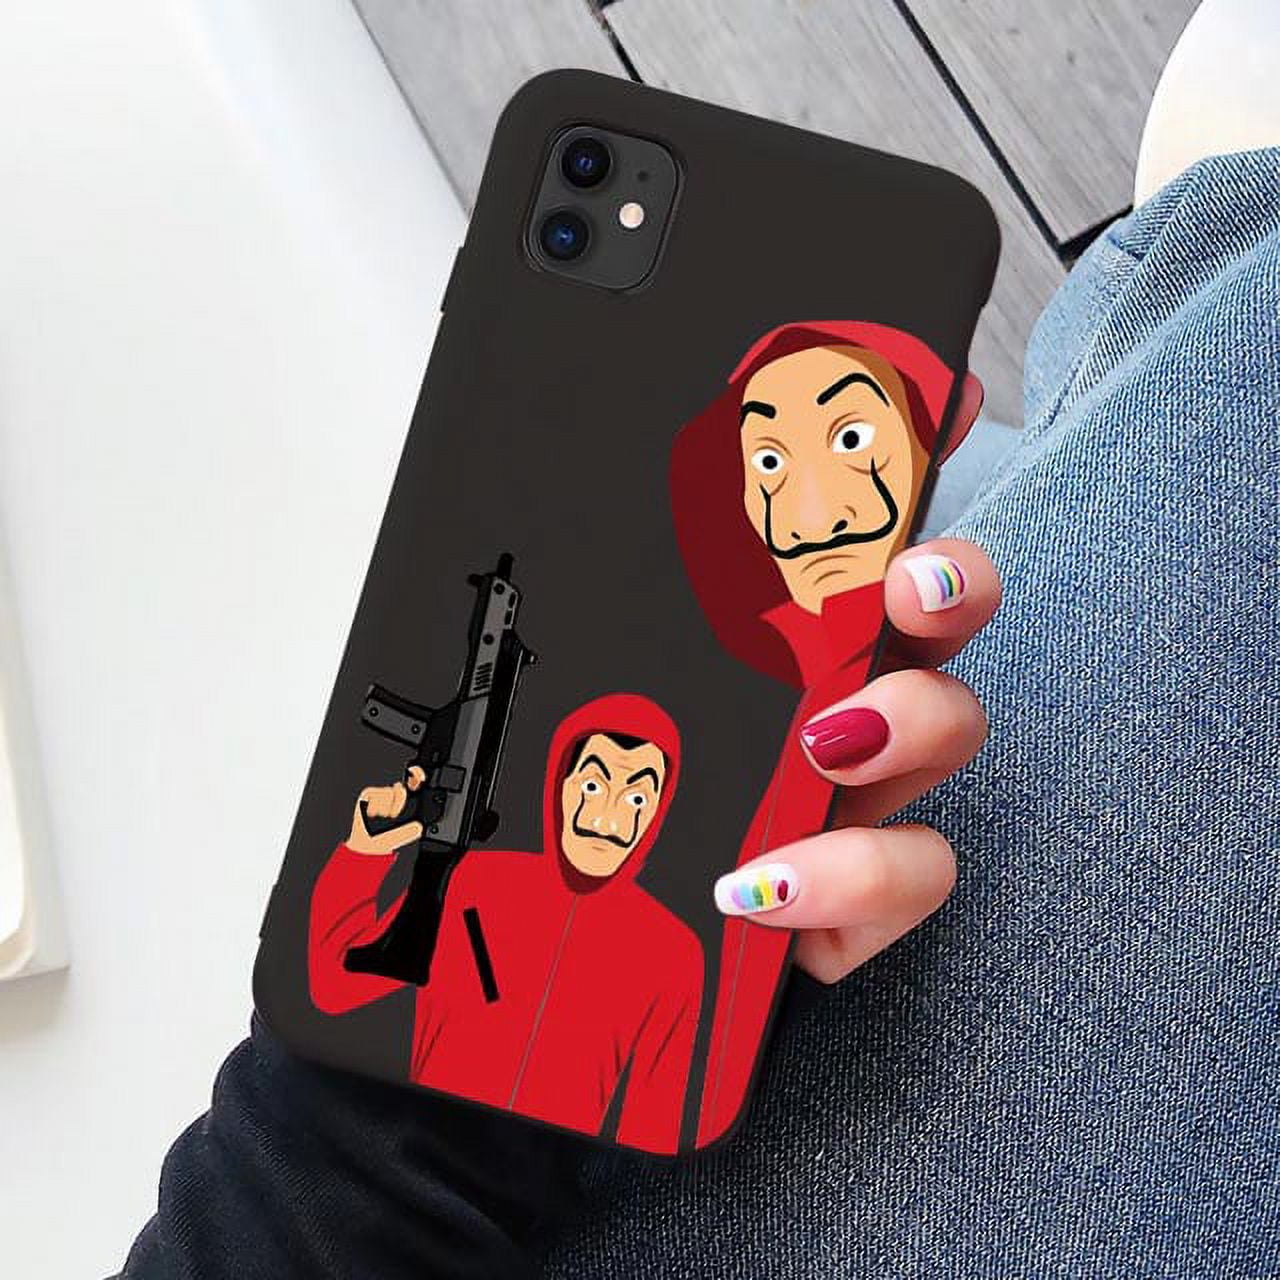 Funny Mechanic Phone Cases - iPhone and Android